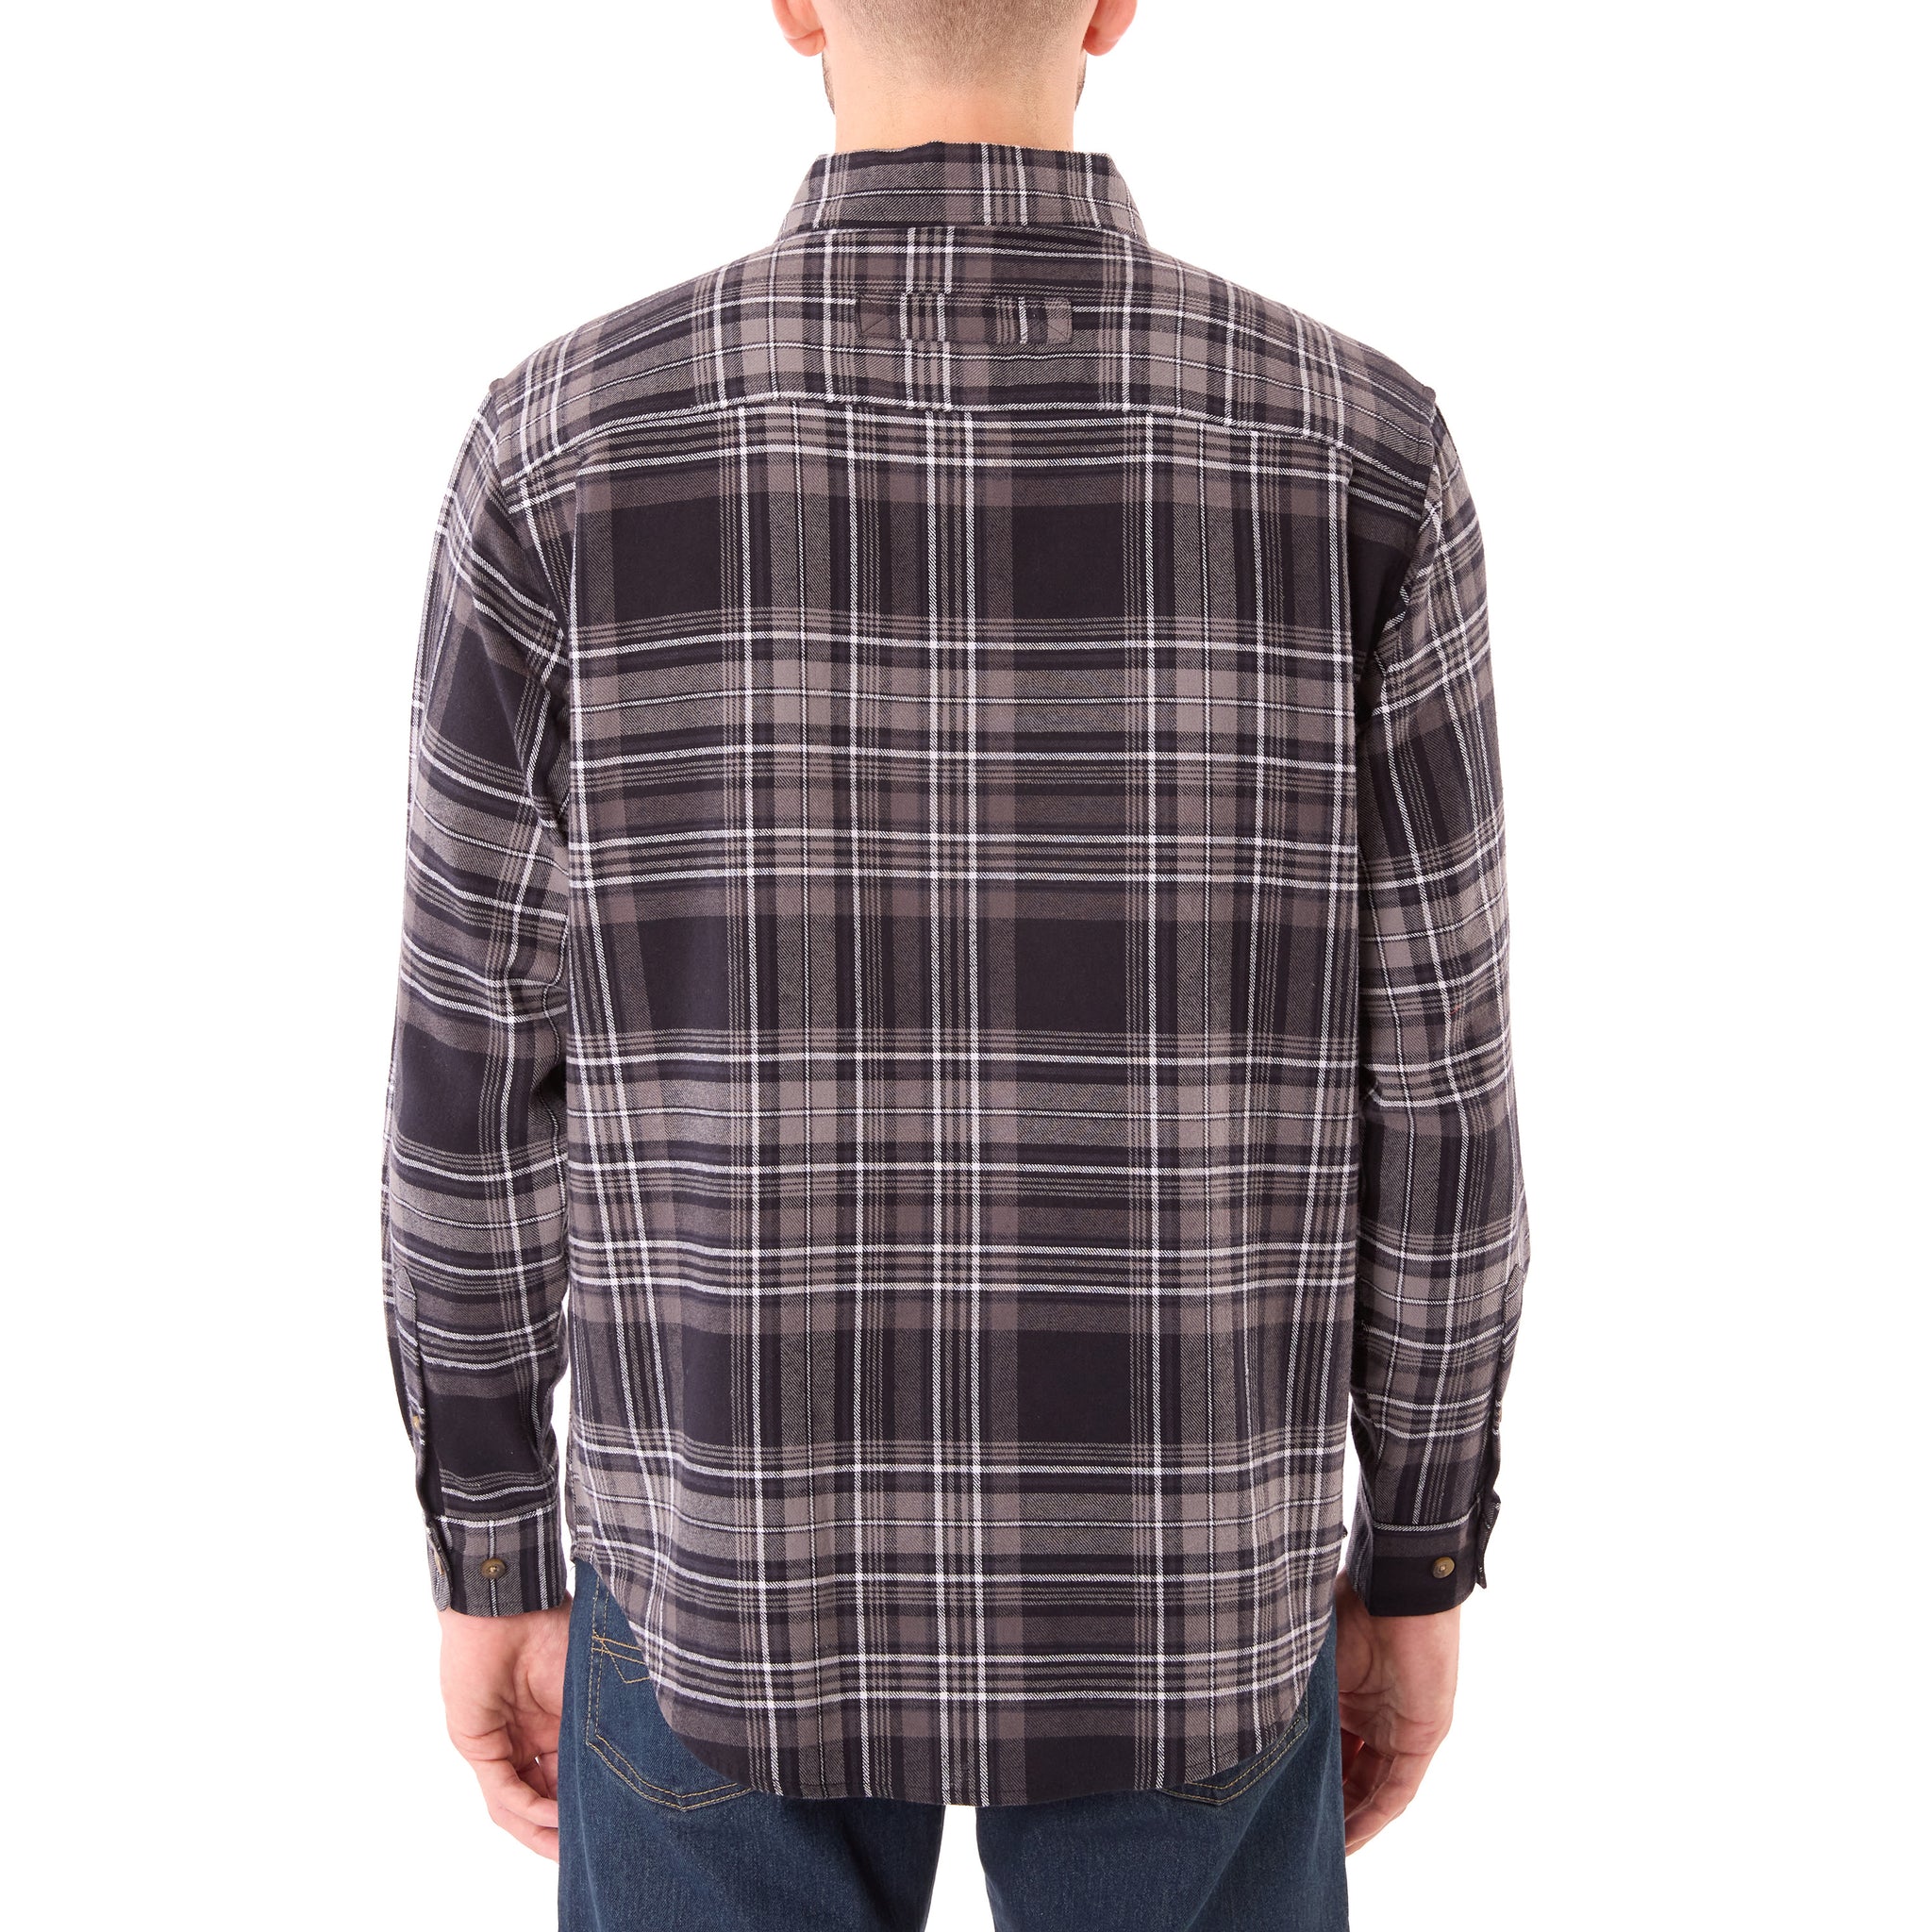 TWO-POCKET BUTTON DOWN FLANNEL SHIRT